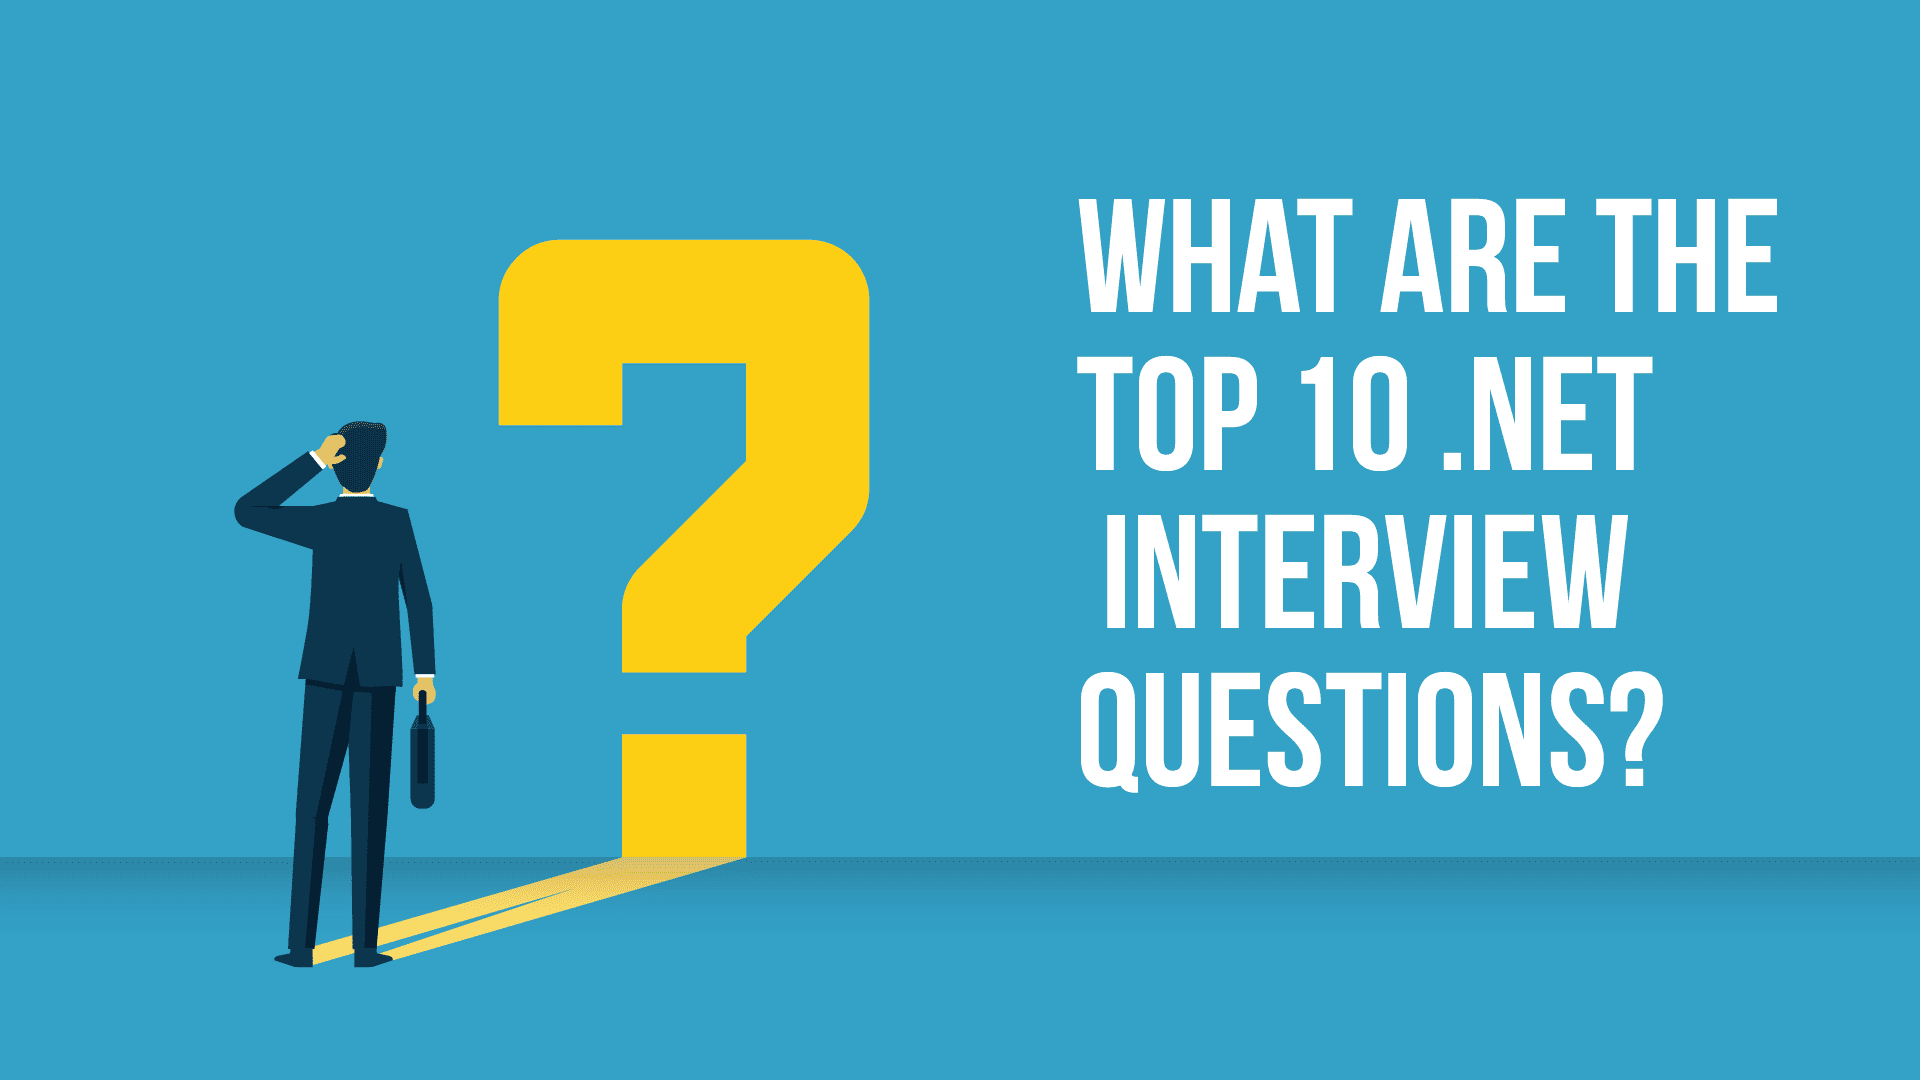 What Are The Top 10 .NET Interview Questions?